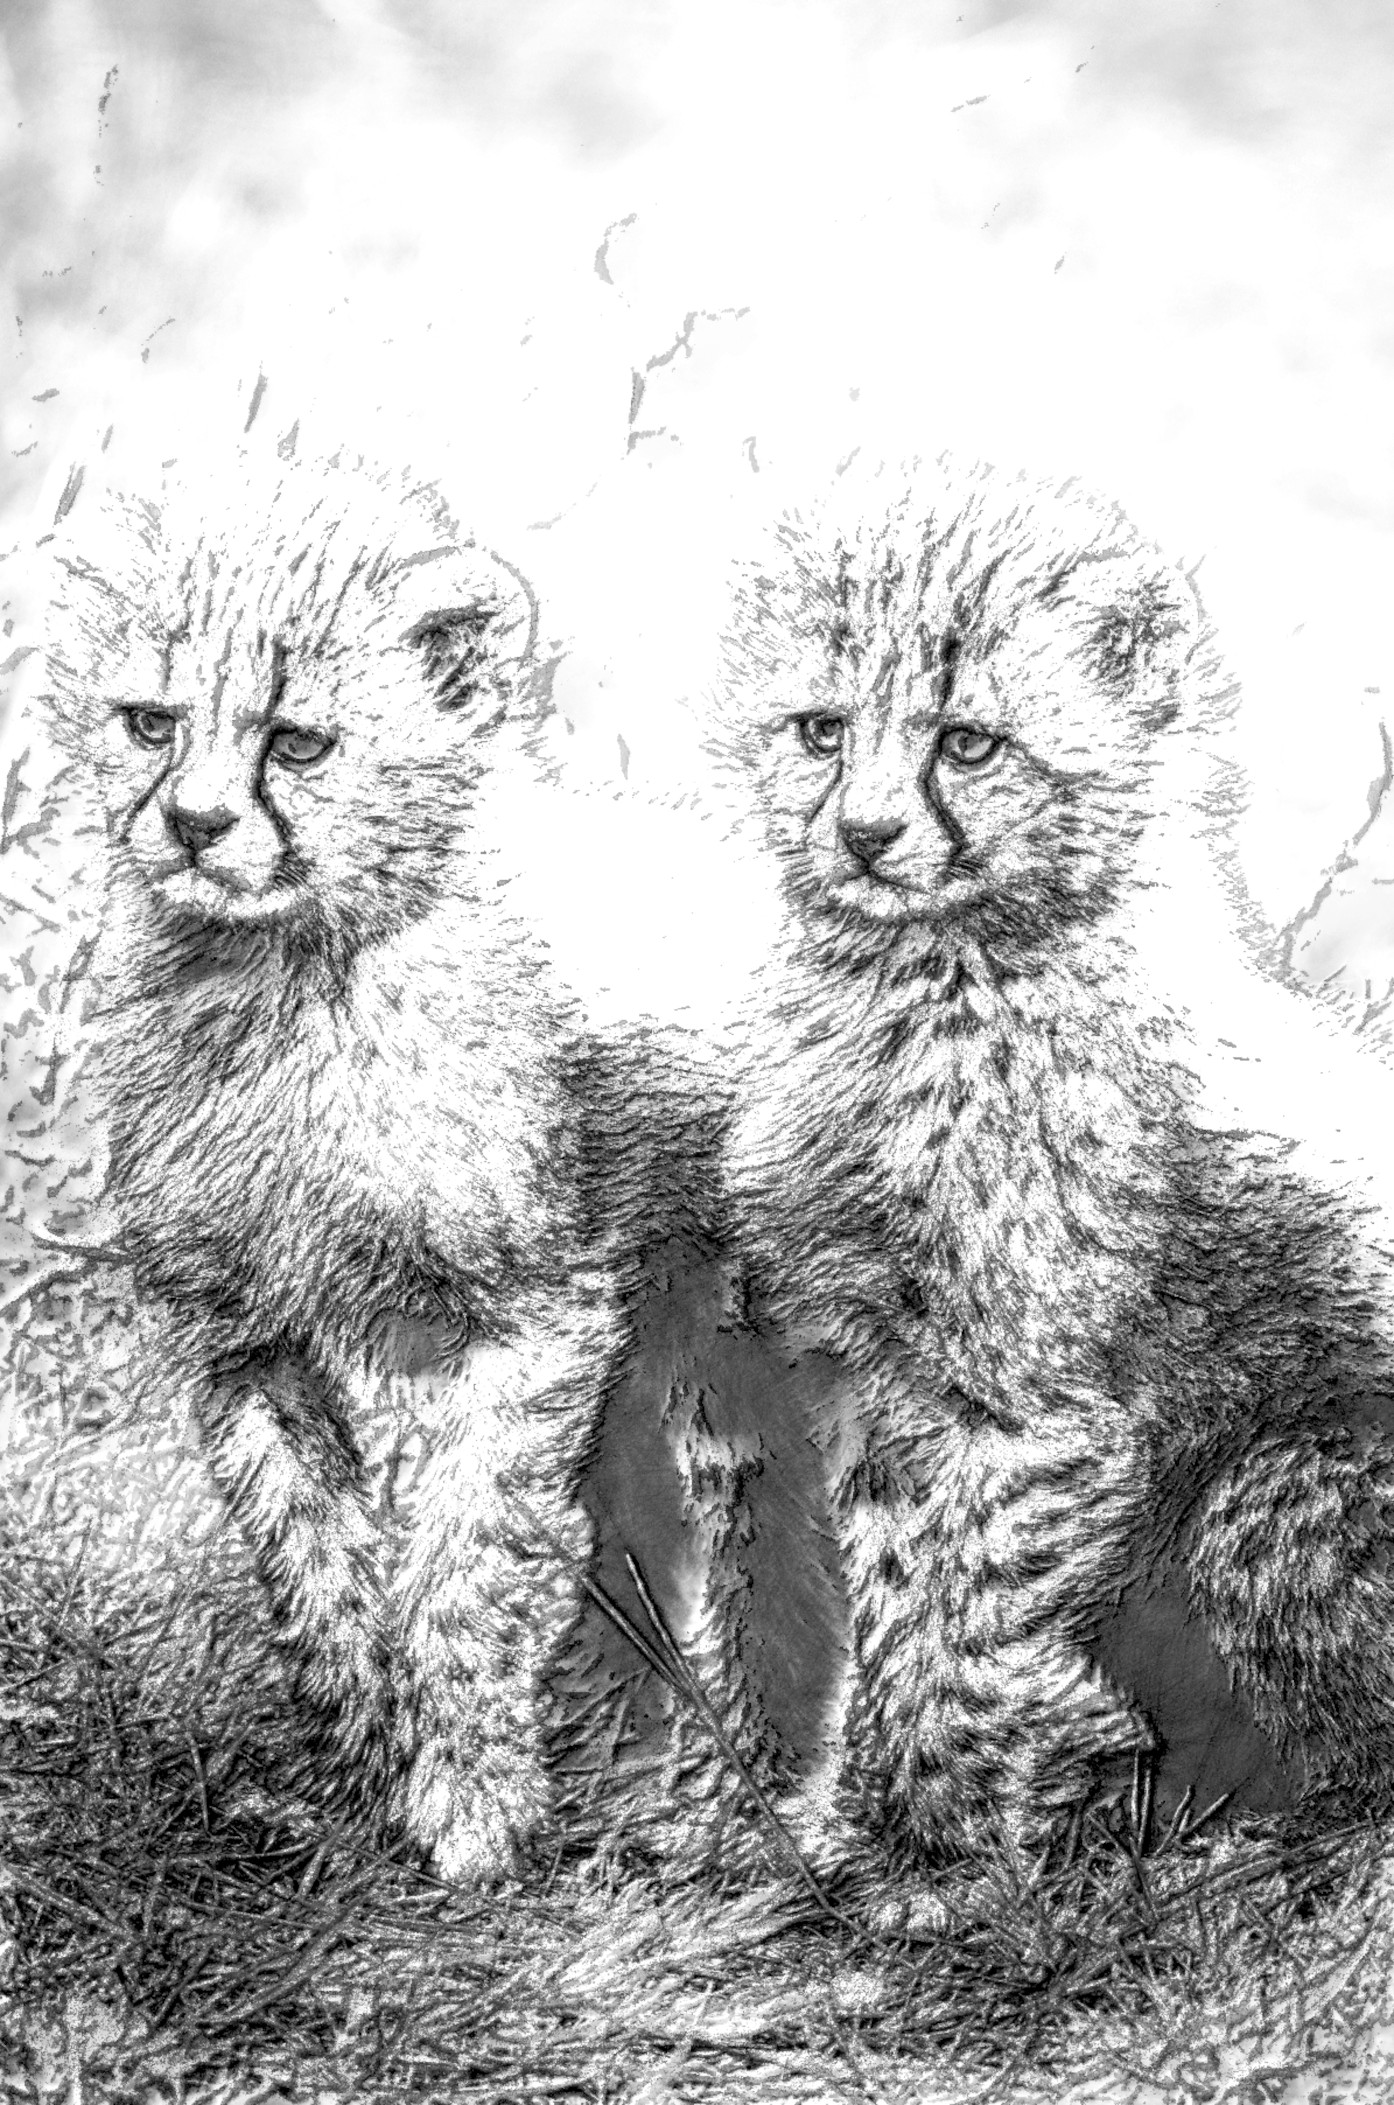 2021-02-17 15-49-01 pexels-pixabay-162318 stroked sketched, grayscale.jpeg